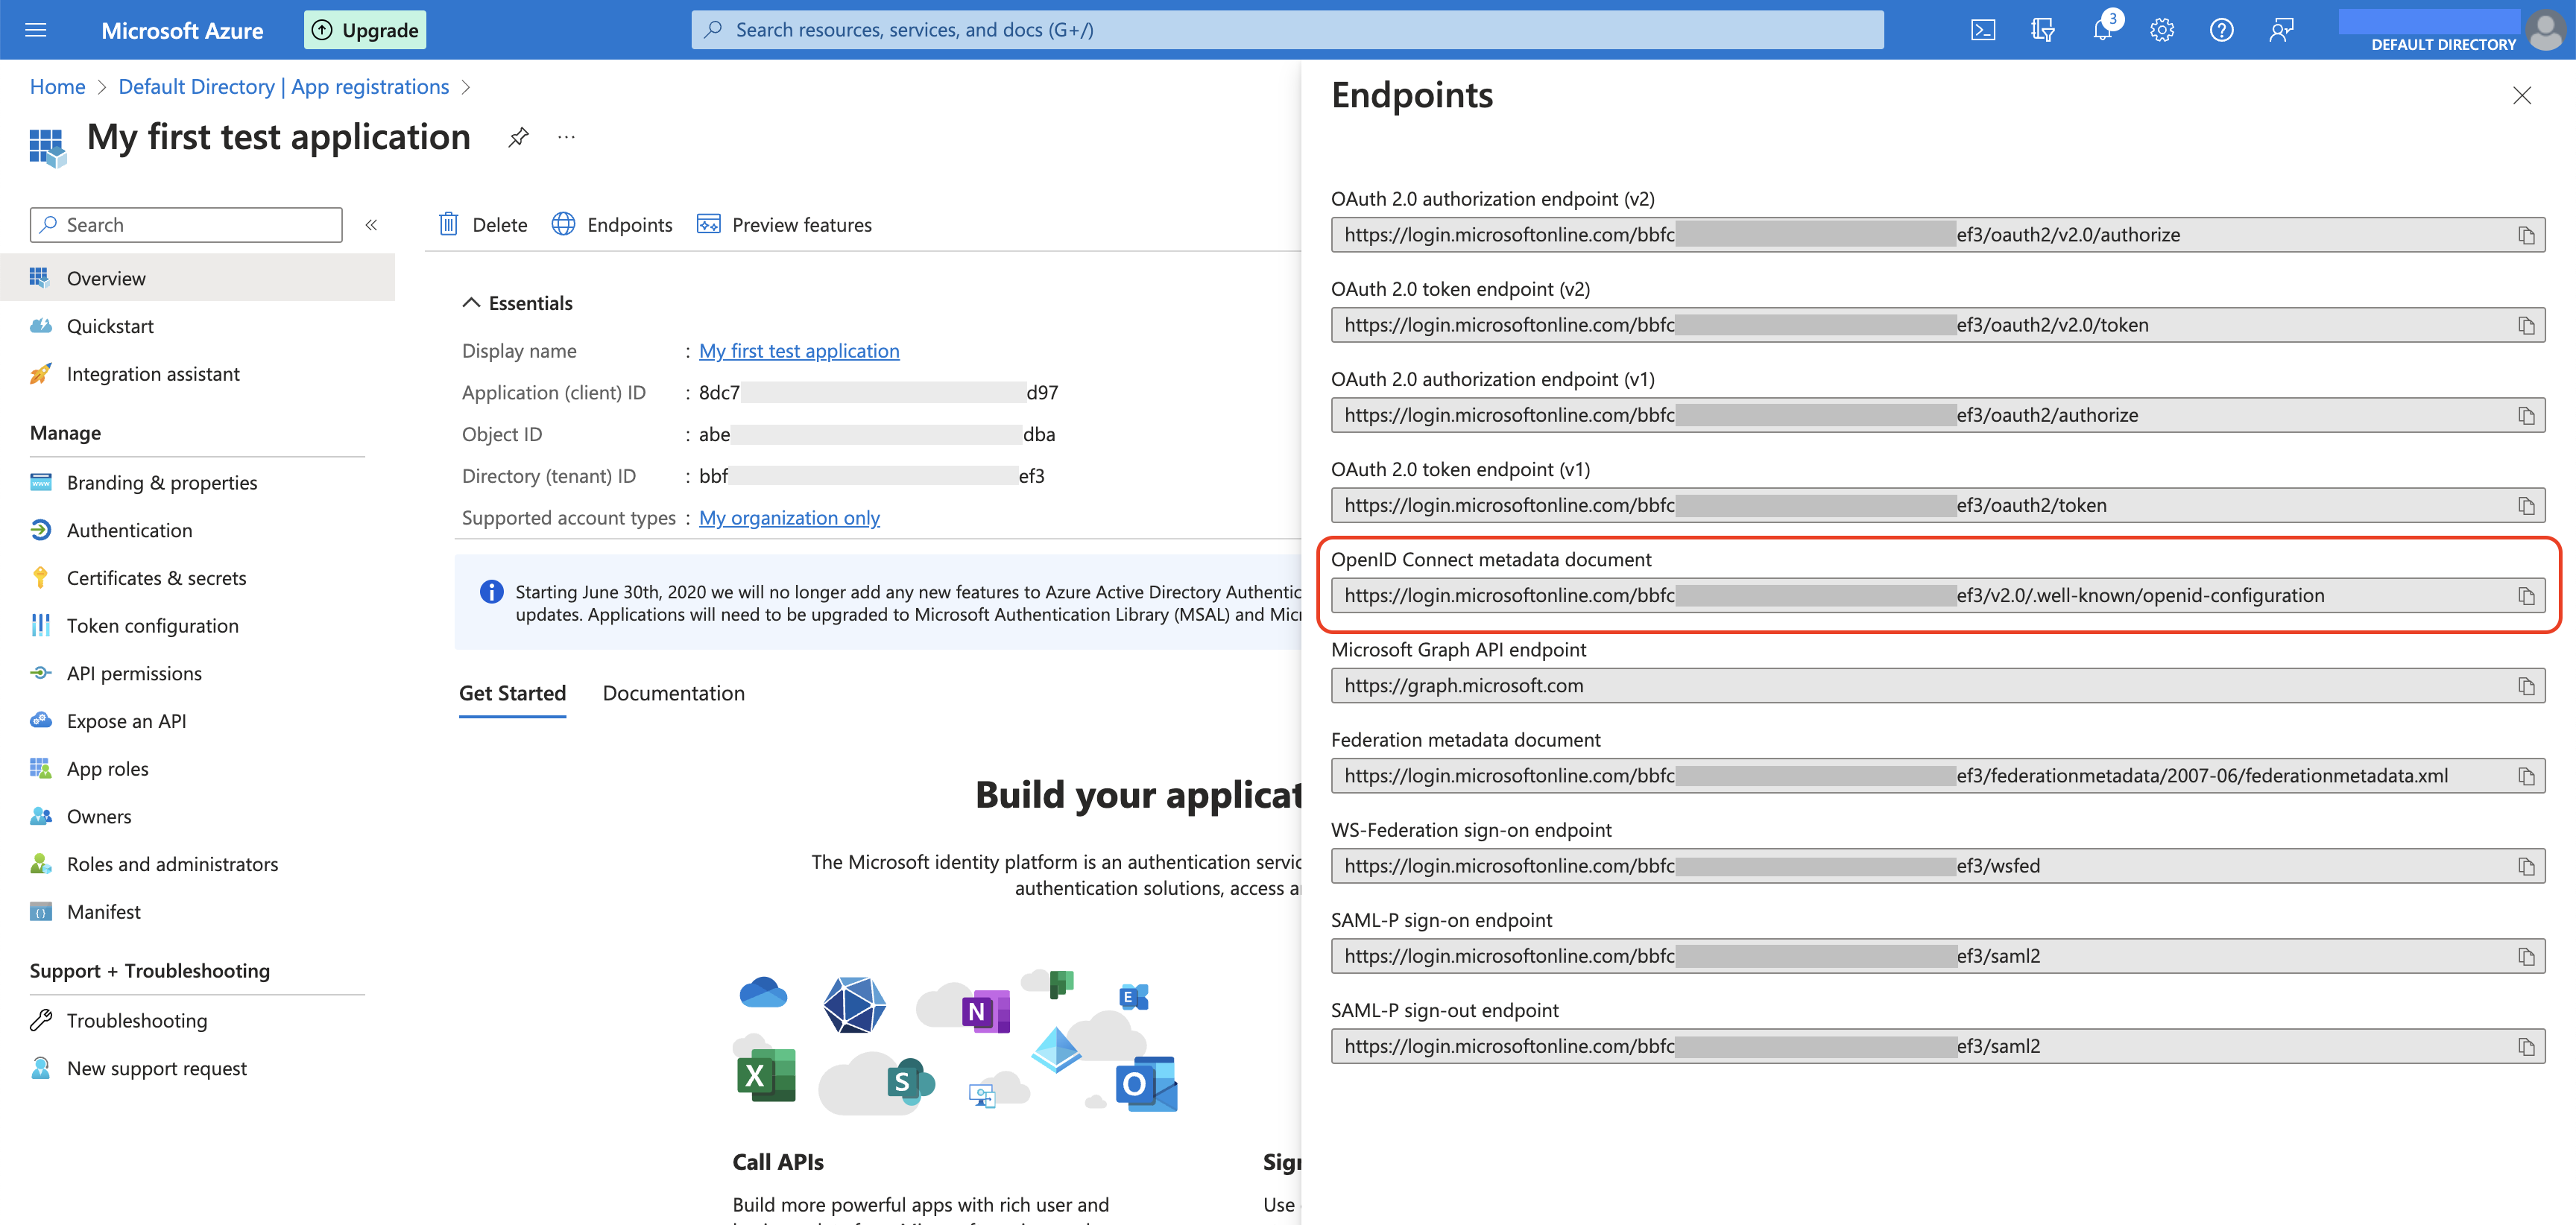 Endpoints tab in Azure